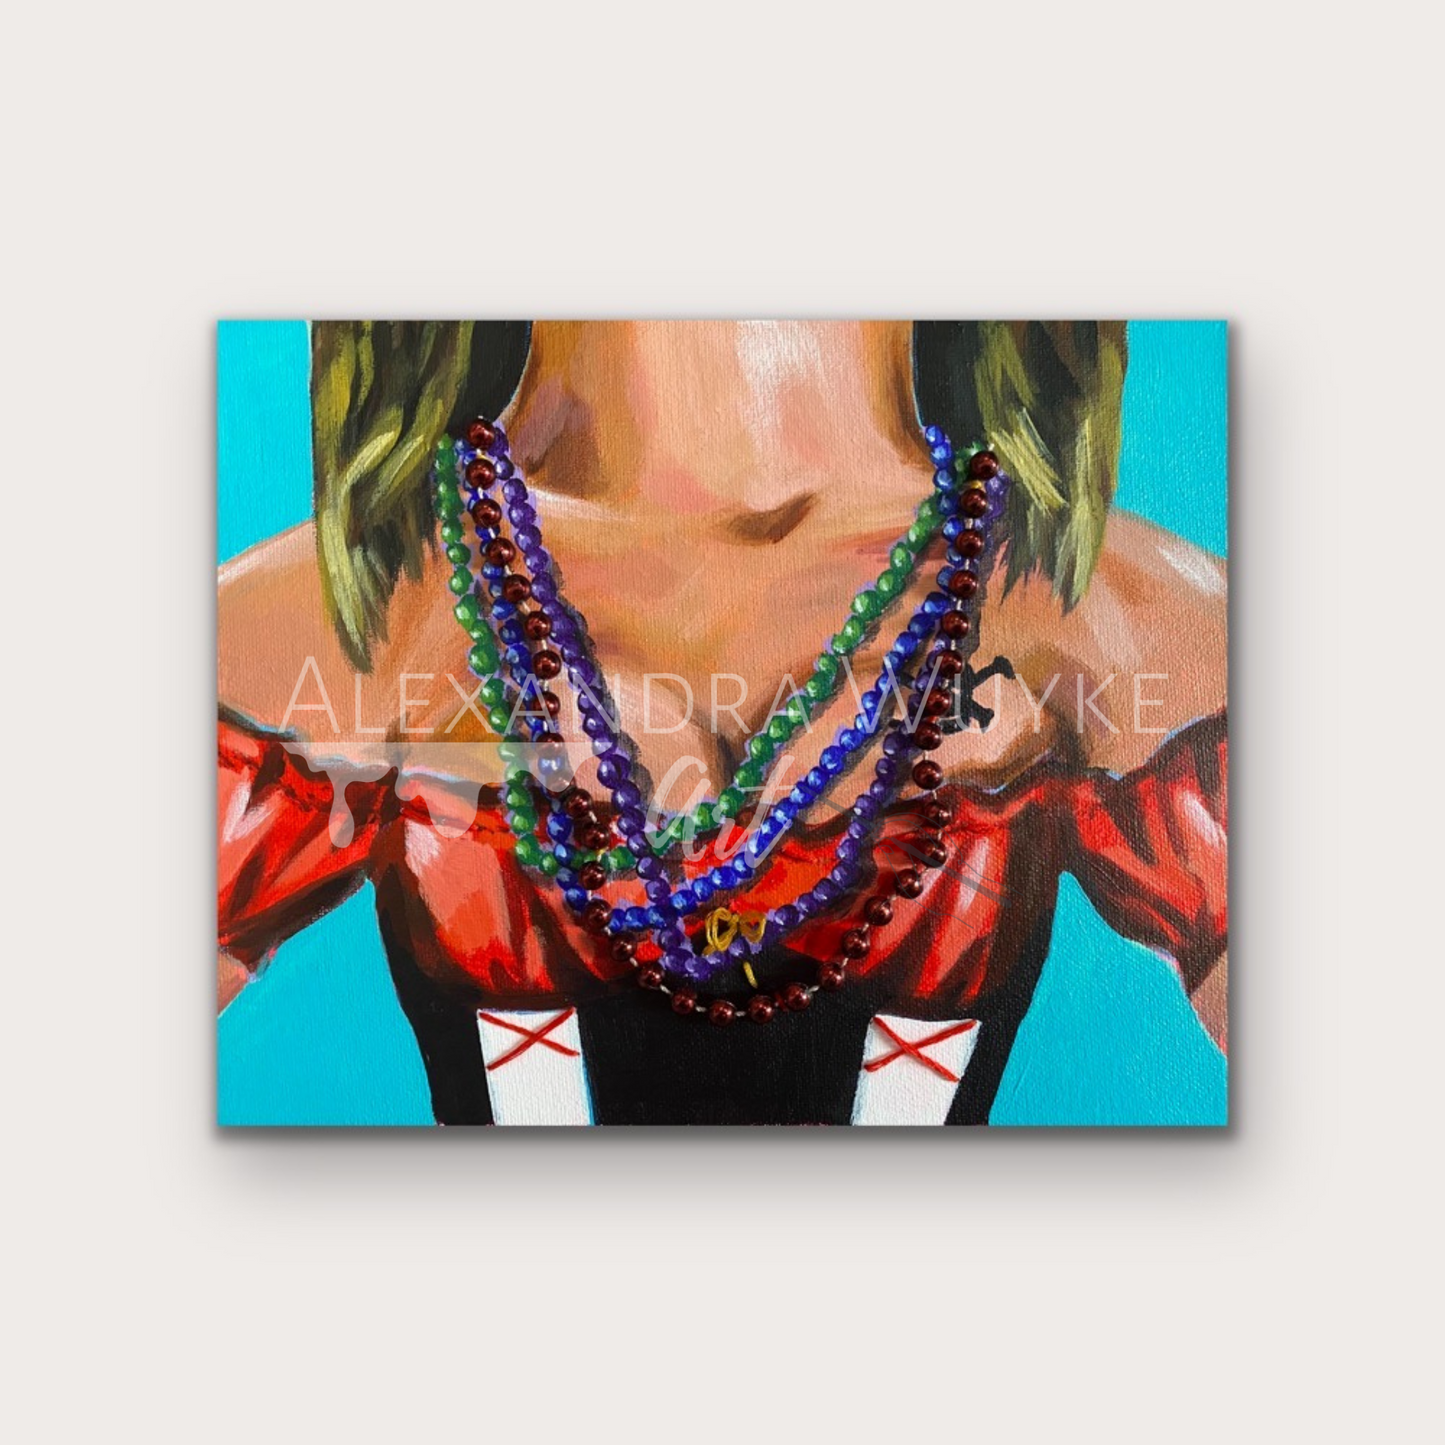 Painting by Alexandra Wuyke Art depicting a "gasparilla girl" wearing beads.